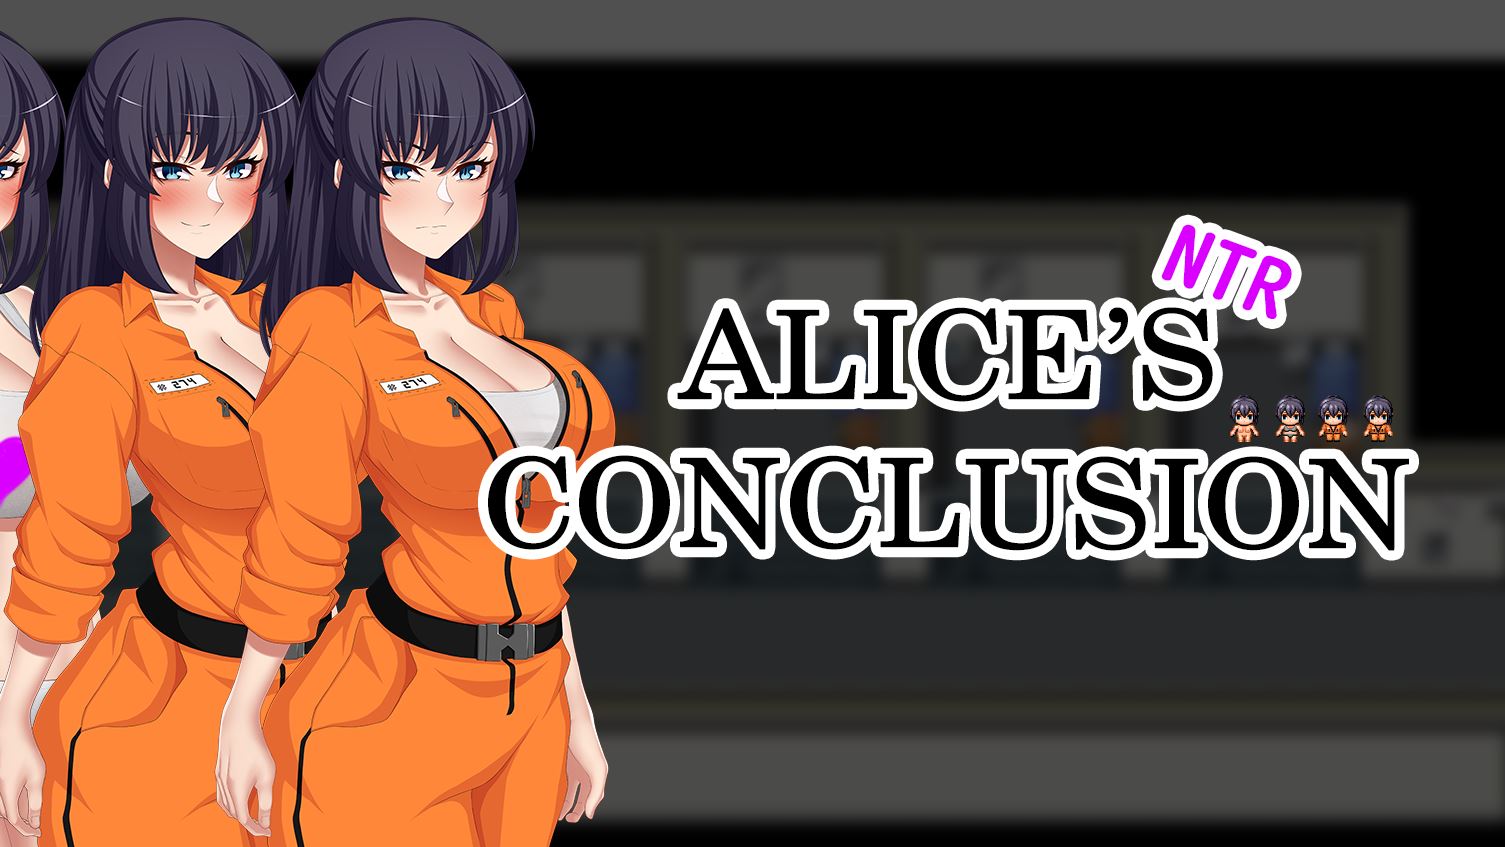 Alice Anime Creampie Porn - RPGM] Alice's conclusion - v1.0a by Hervi 18+ Adult xxx Porn Game Download